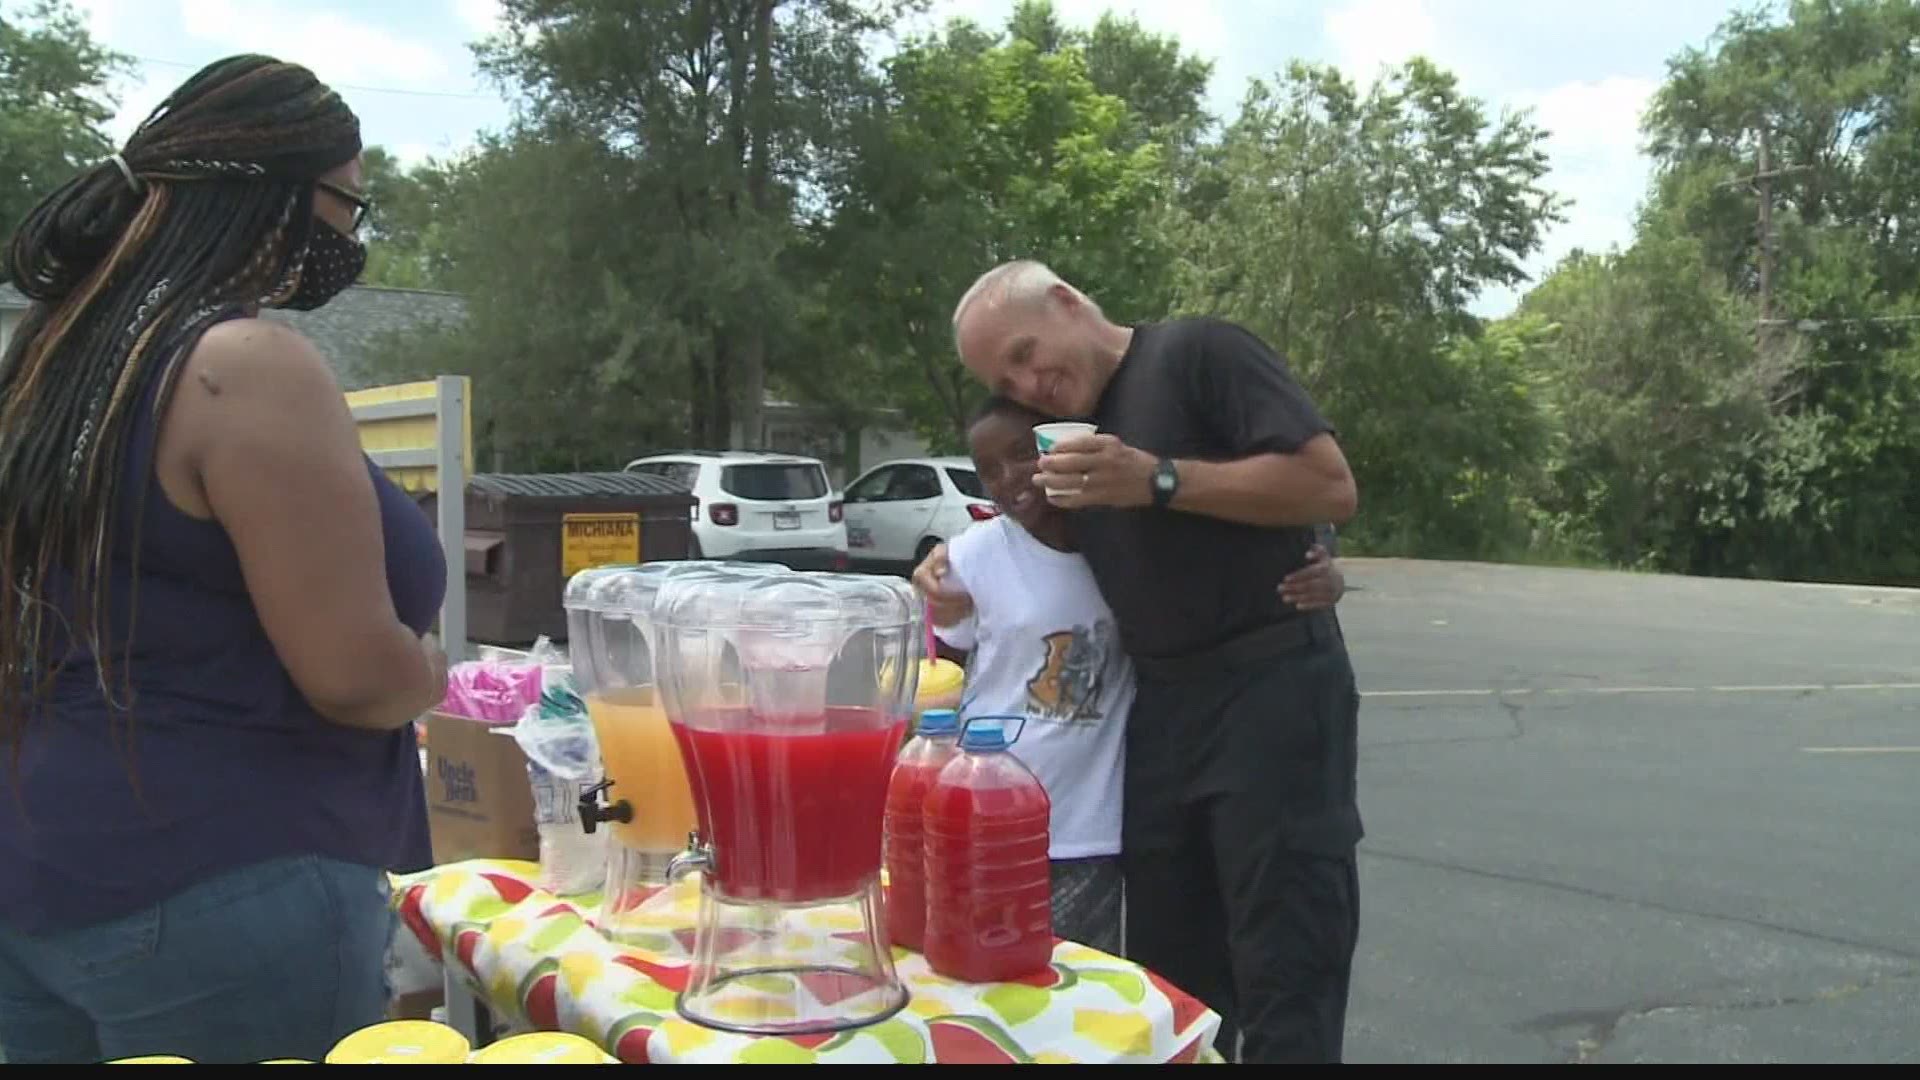 South Bend police officer Ron Glon offered to help Jaeylnn Wilson and his brother at their lemonade stand Sunday afternoon — as well as match whatever they make.